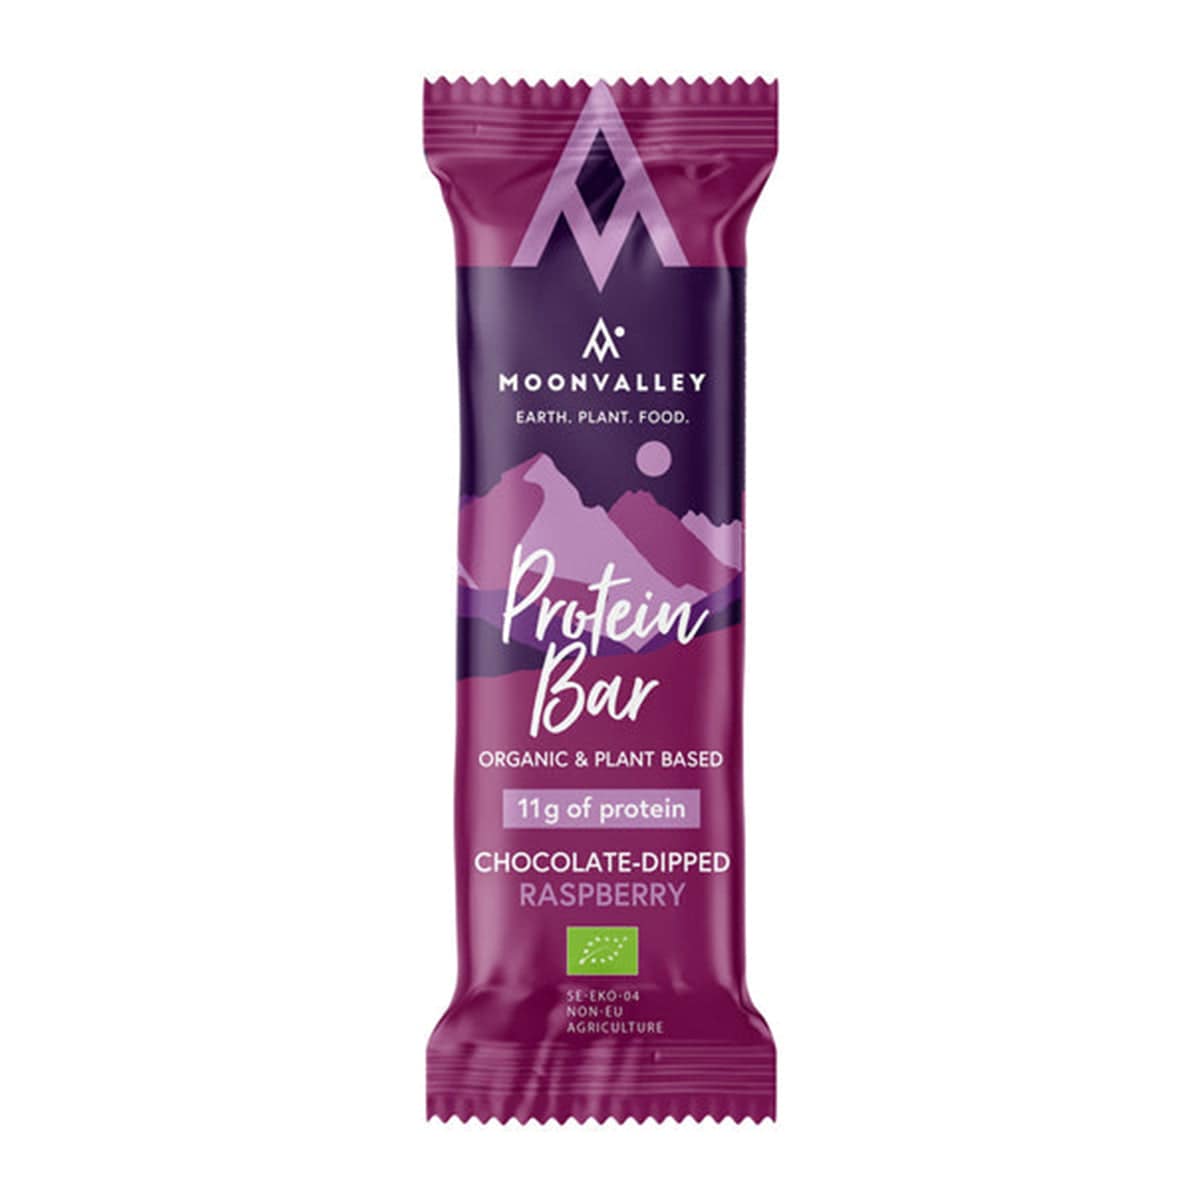 Moonvalley Protein Bar Raspberry Organic Protein Bar Chocolate-Dipped XMiles